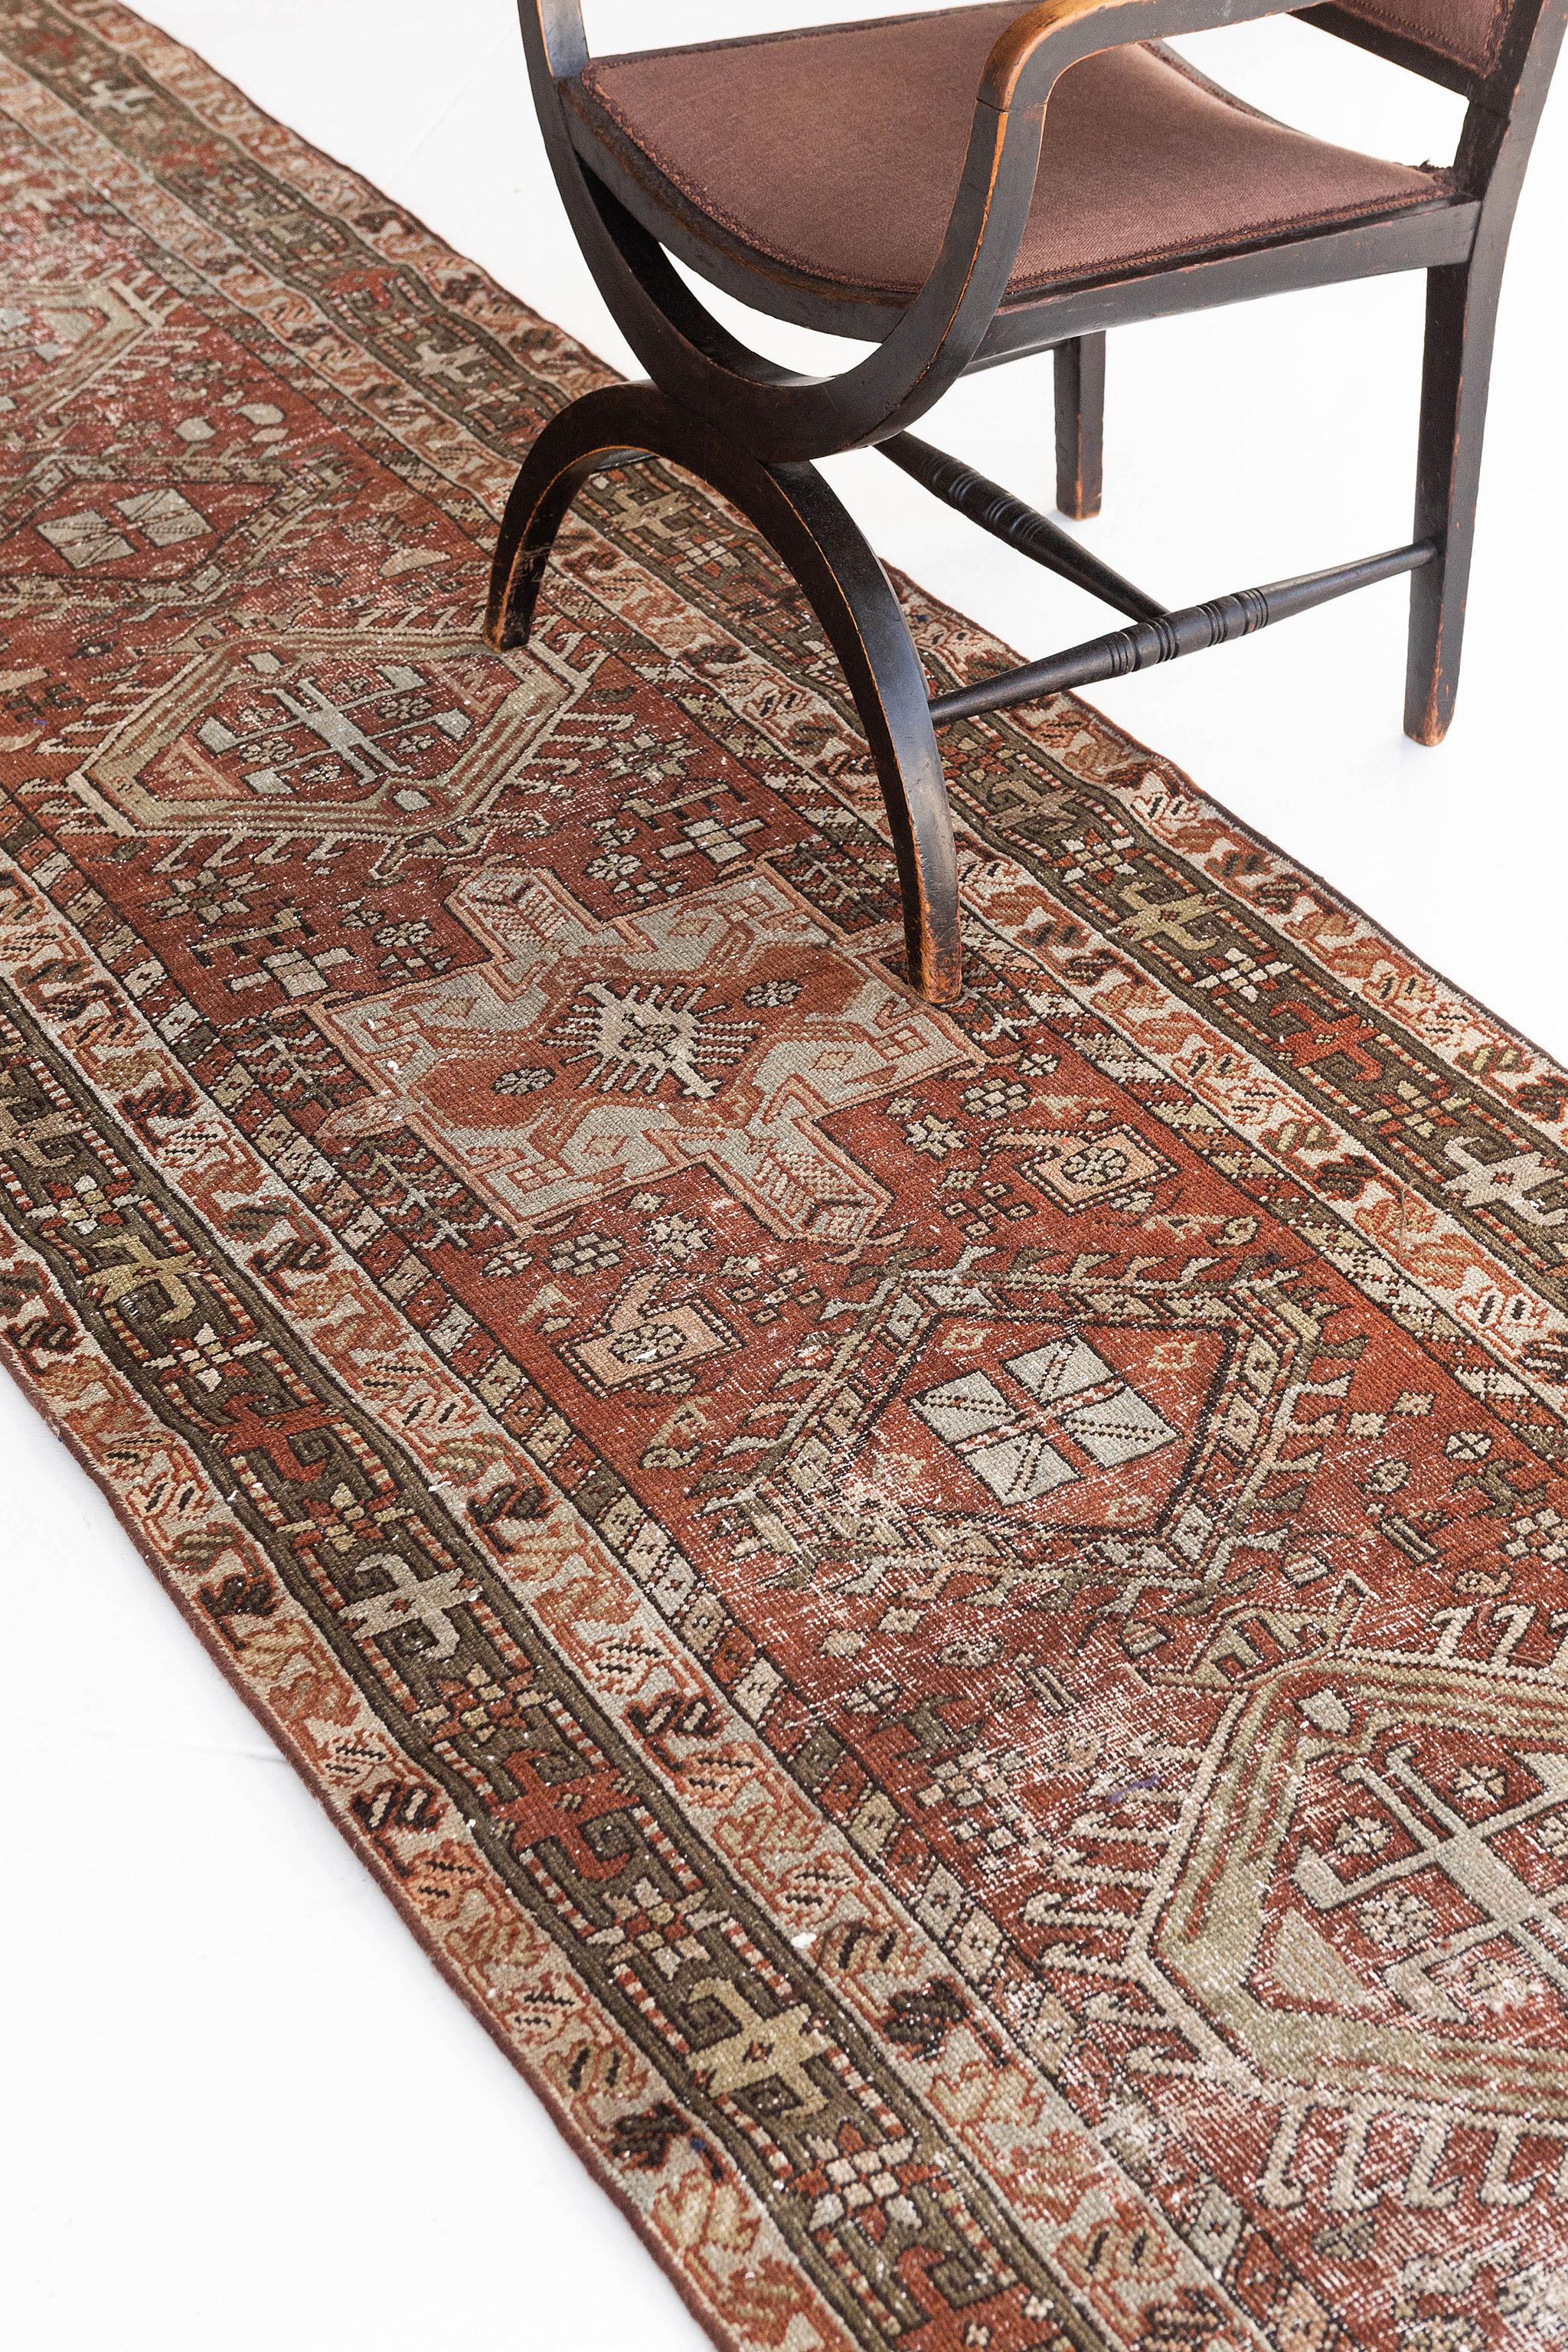 This chic antique Persian Heriz runner rug is a robust red and rust blend of colours. It is distinguished by its beautiful lines and details featuring various medallions lining up together to create a fascinating piece that will surely captivate the